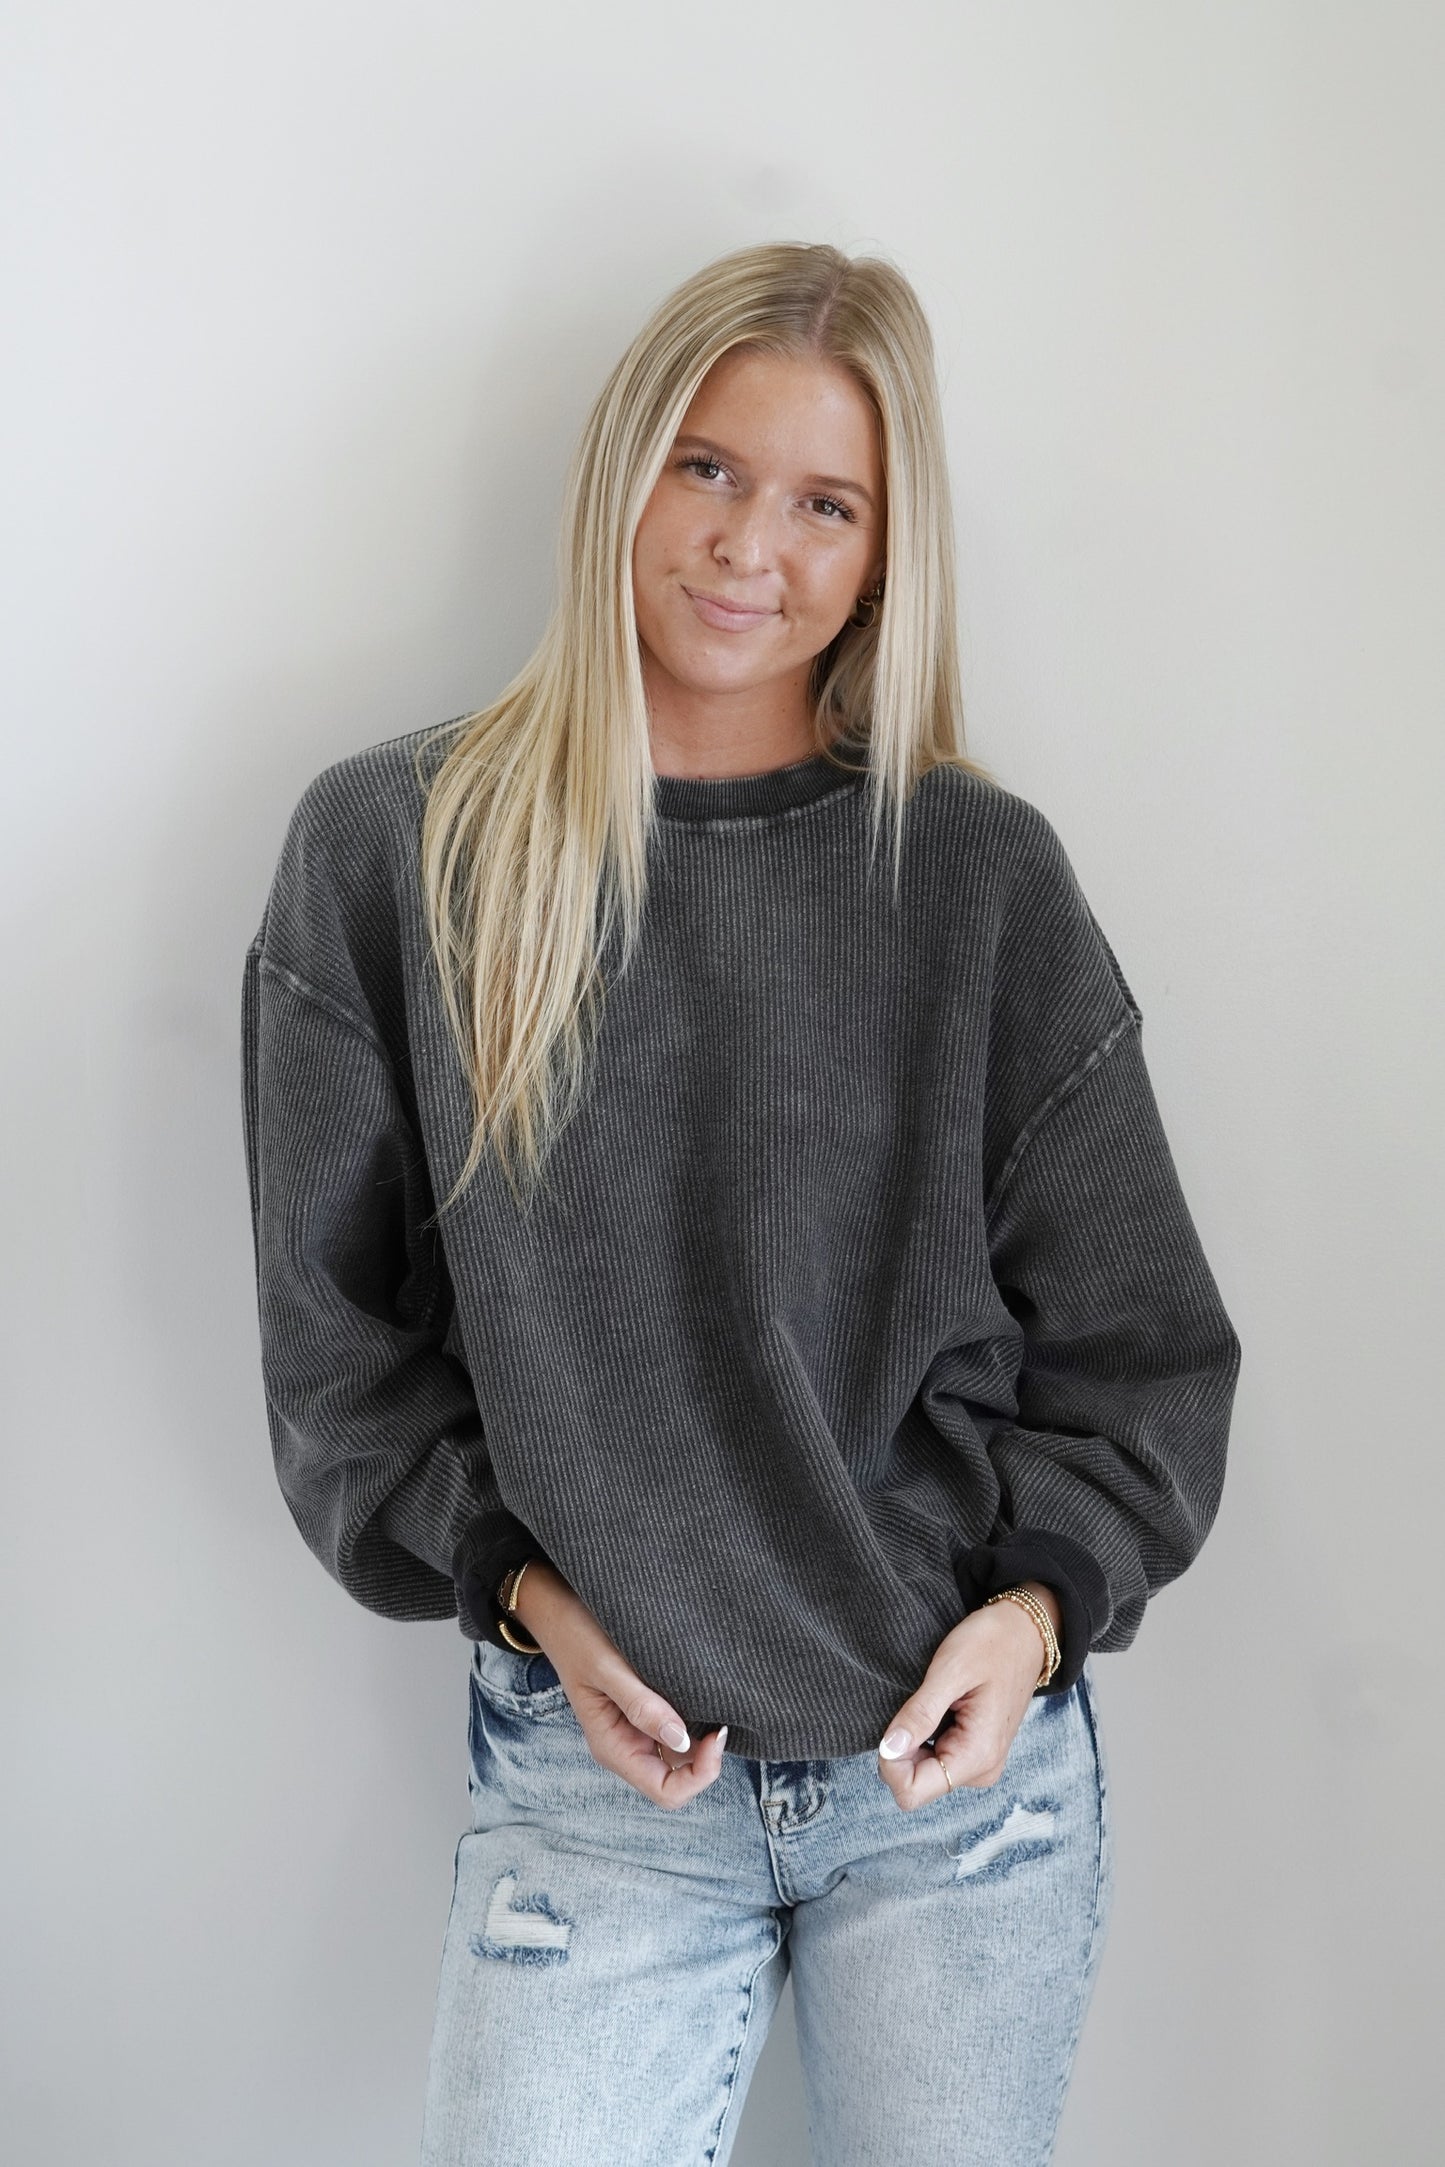 Calla Corded Crew Everyday Sweatshirt Crew Neckline Long Sleeve Corded Material Colors:  Black, Full Length Relaxed Fit 100% Cotton